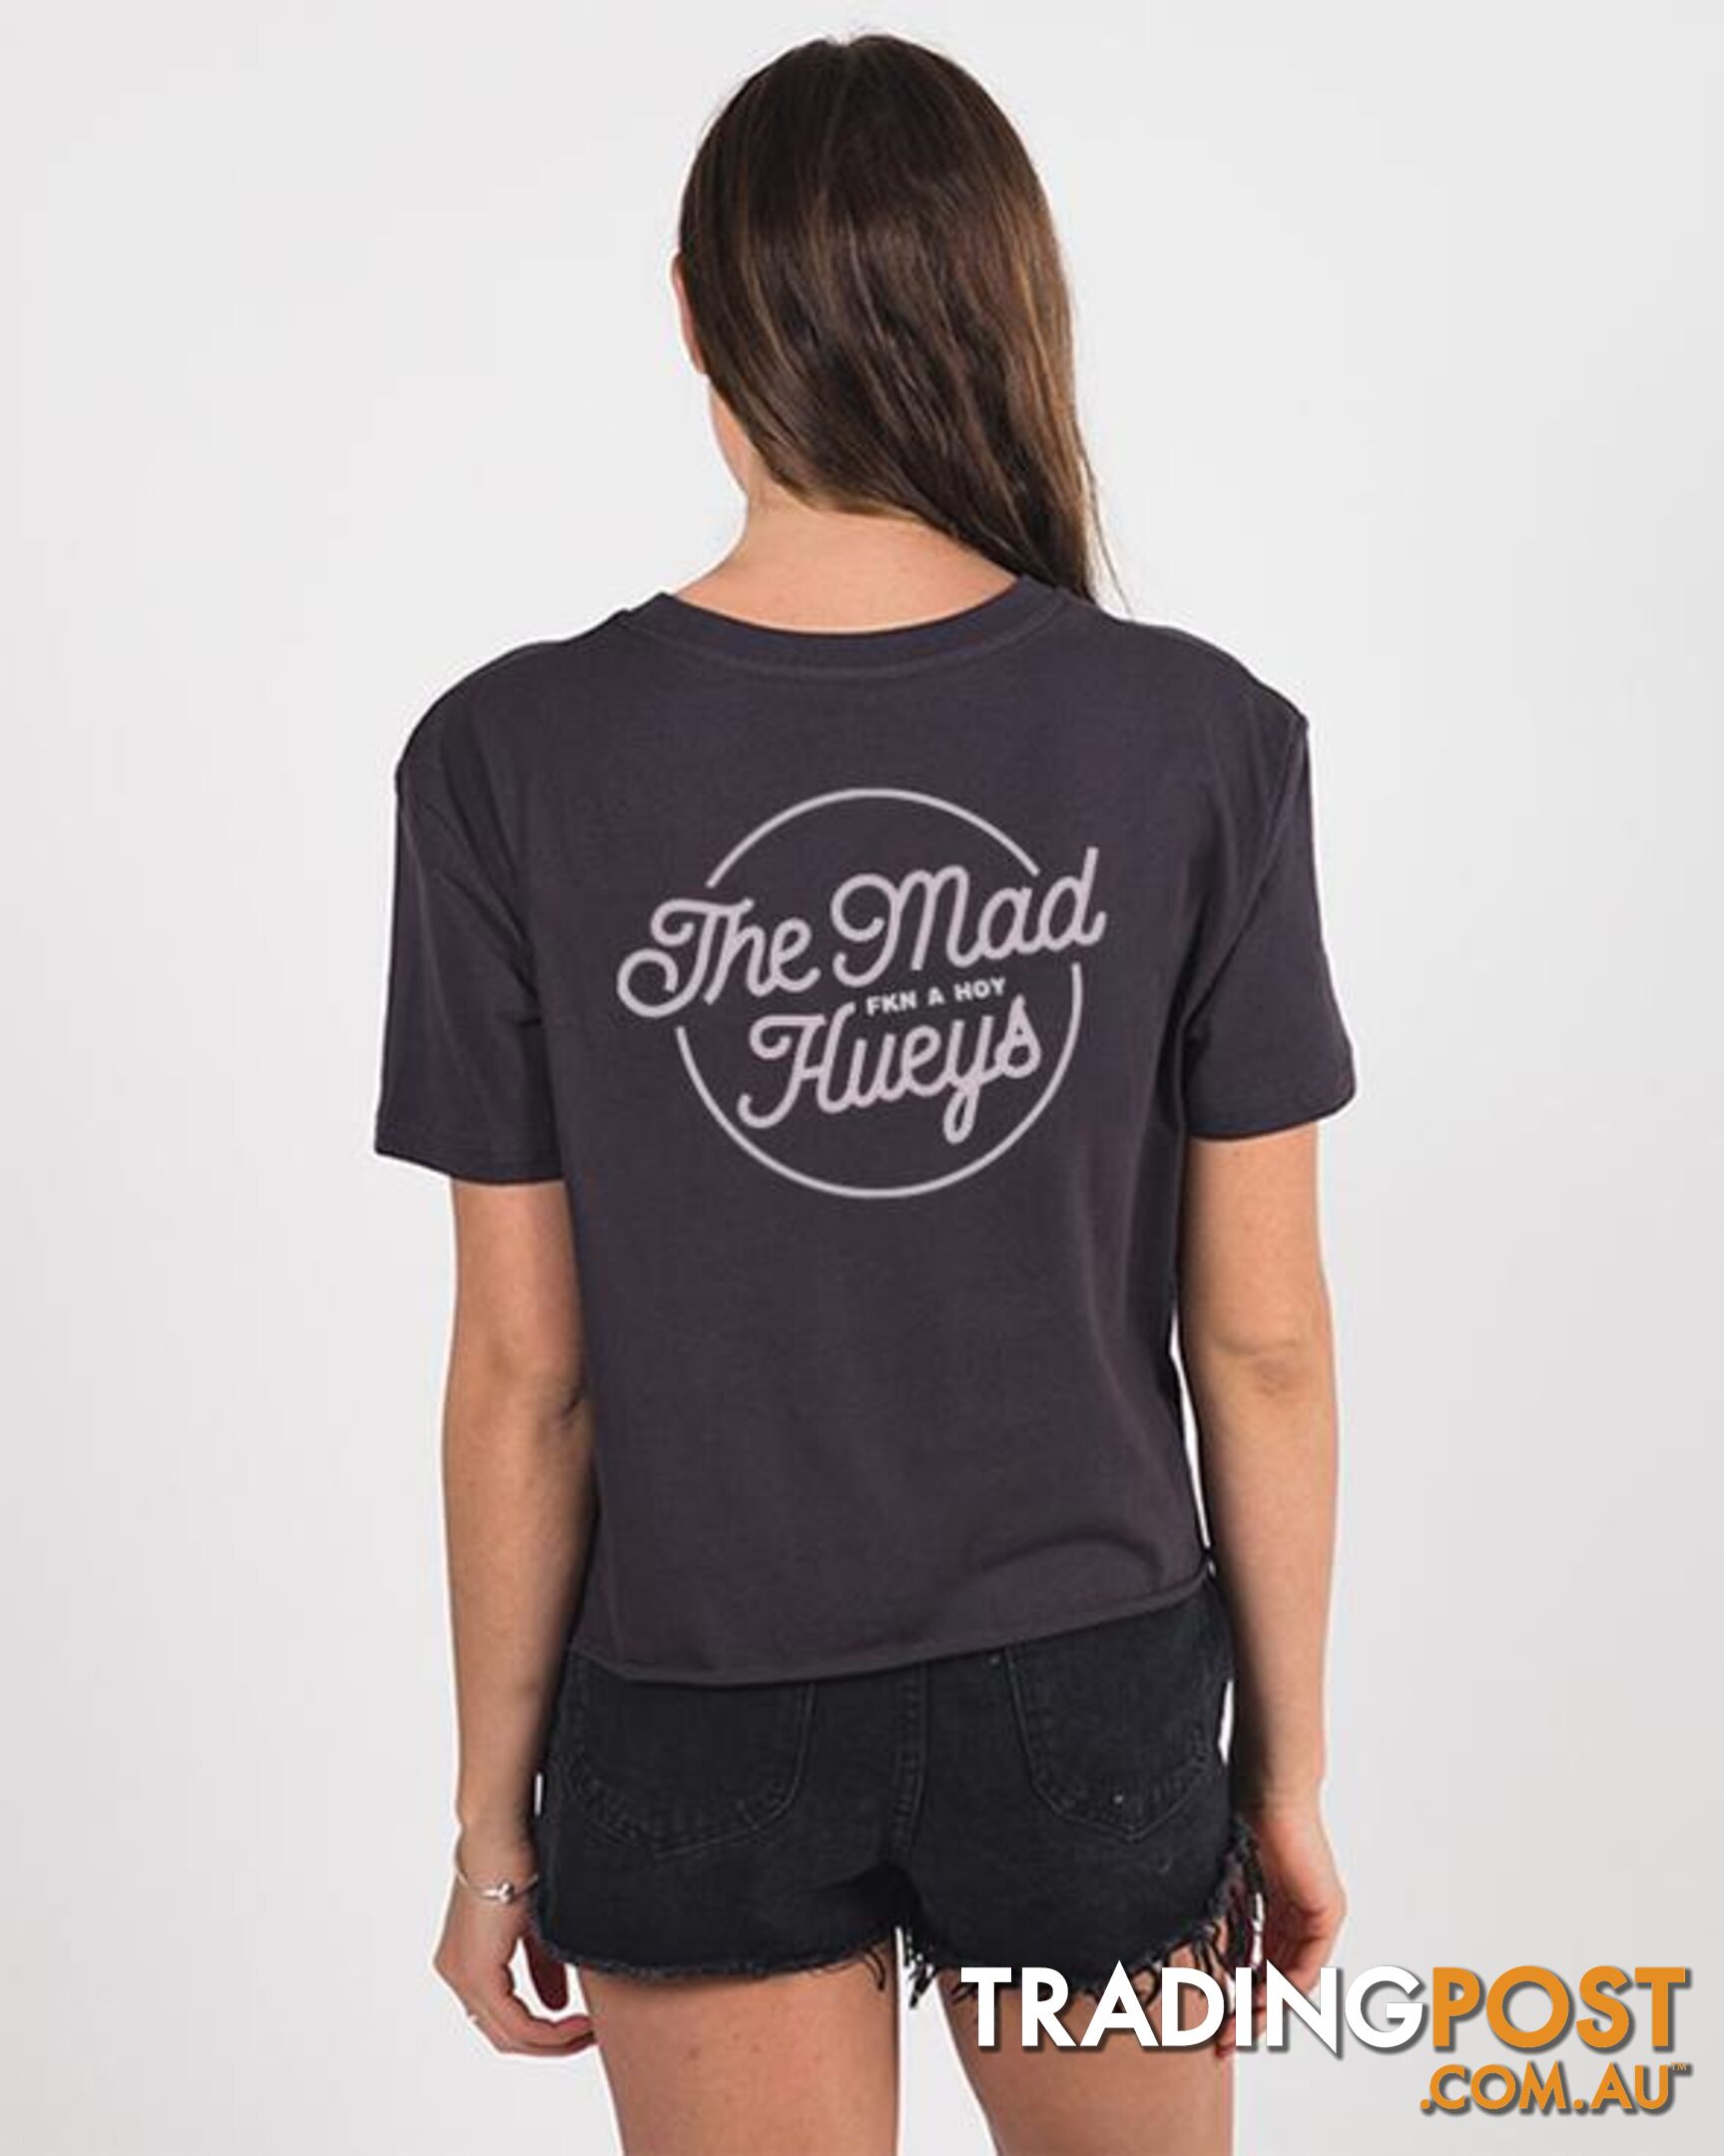 WOMENS FKN A HOY TEE - ALMOST BLACK - The Mad Hueys H418W01002